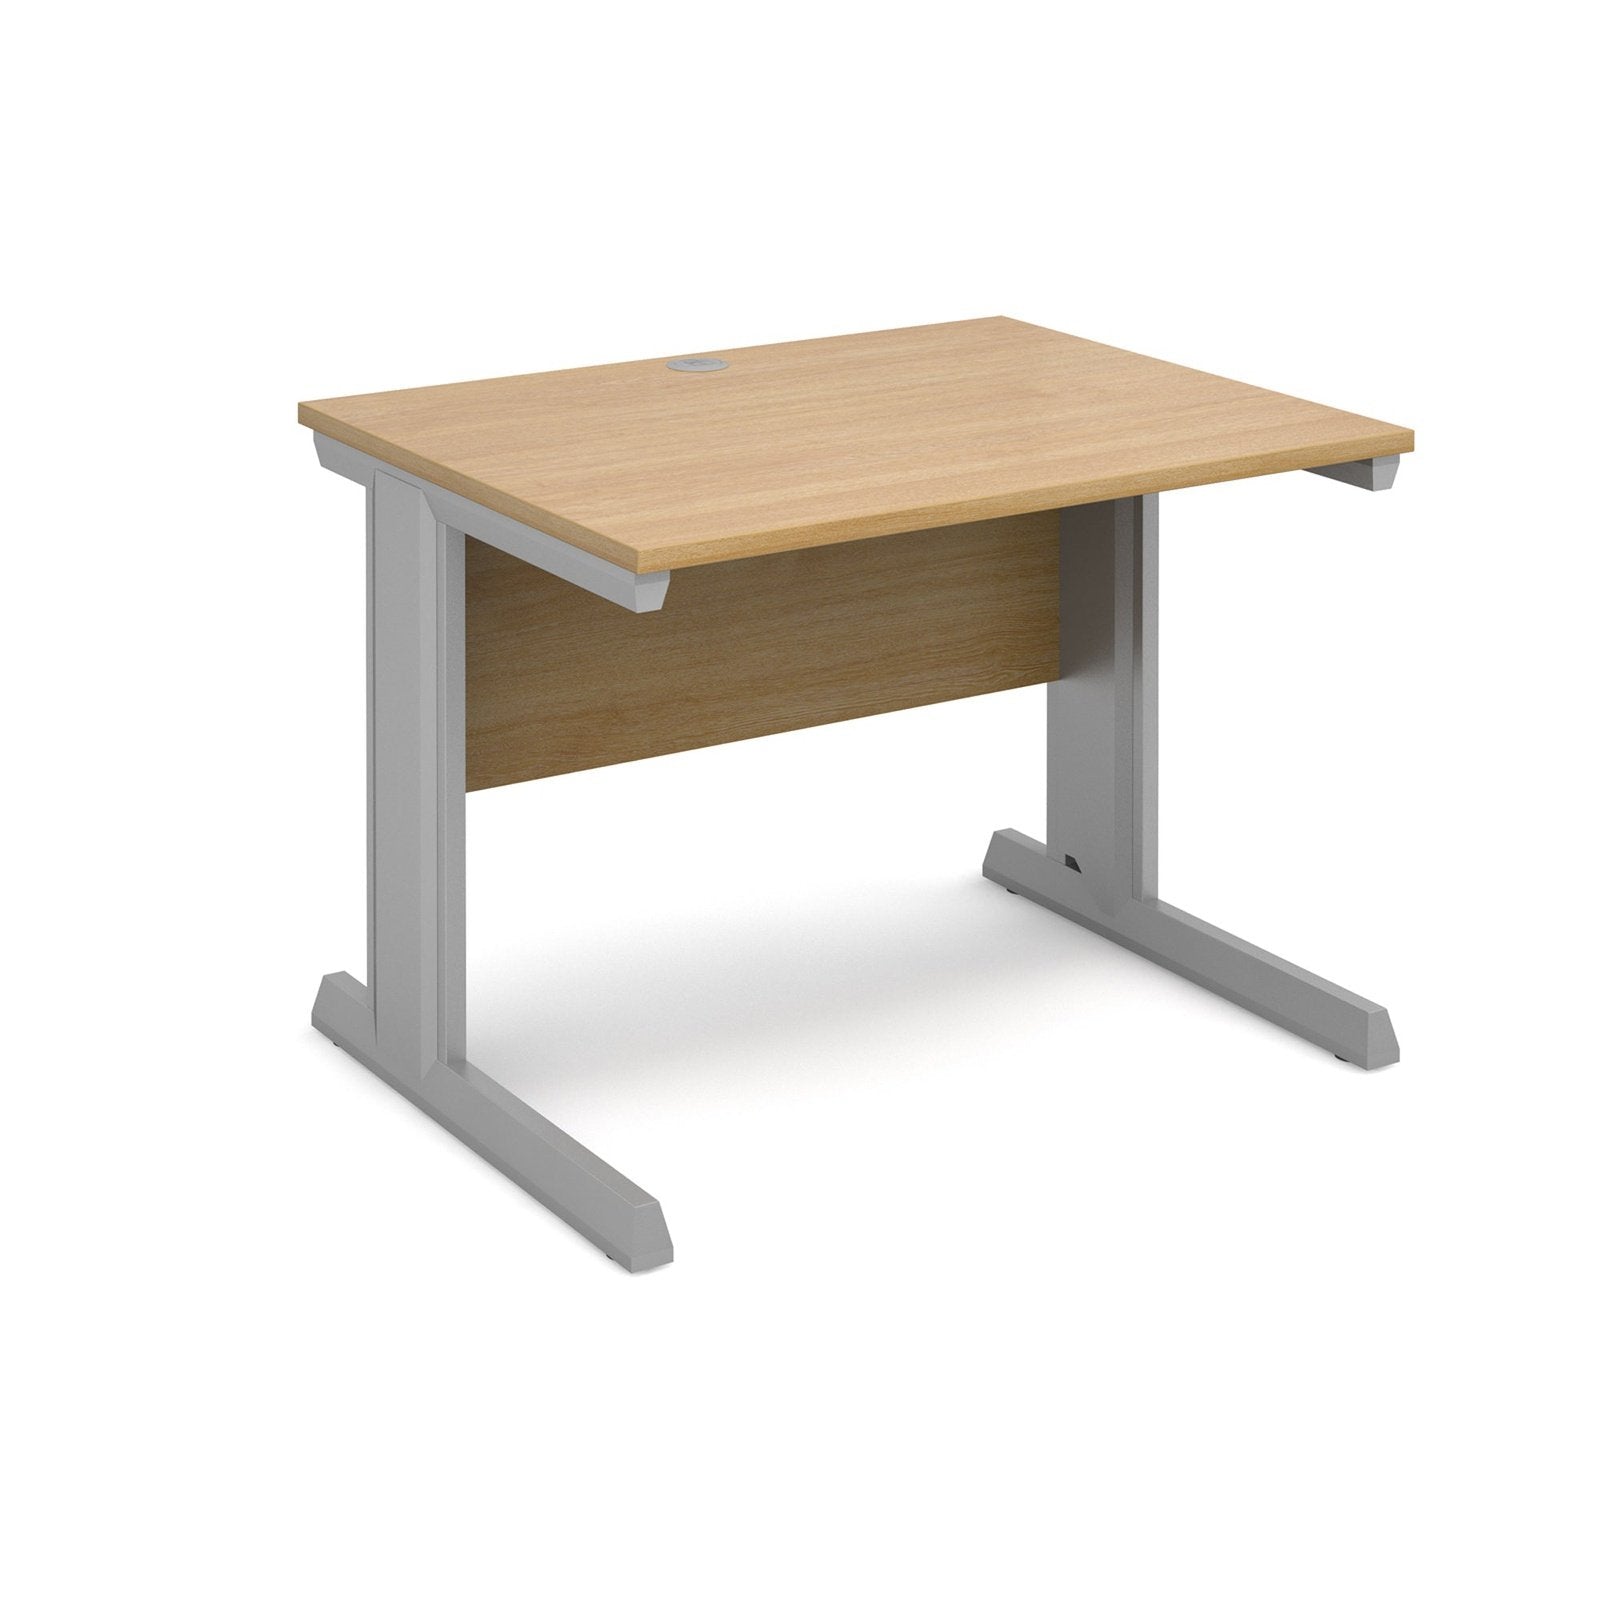 Vivo straight desk 800 deep - Office Products Online